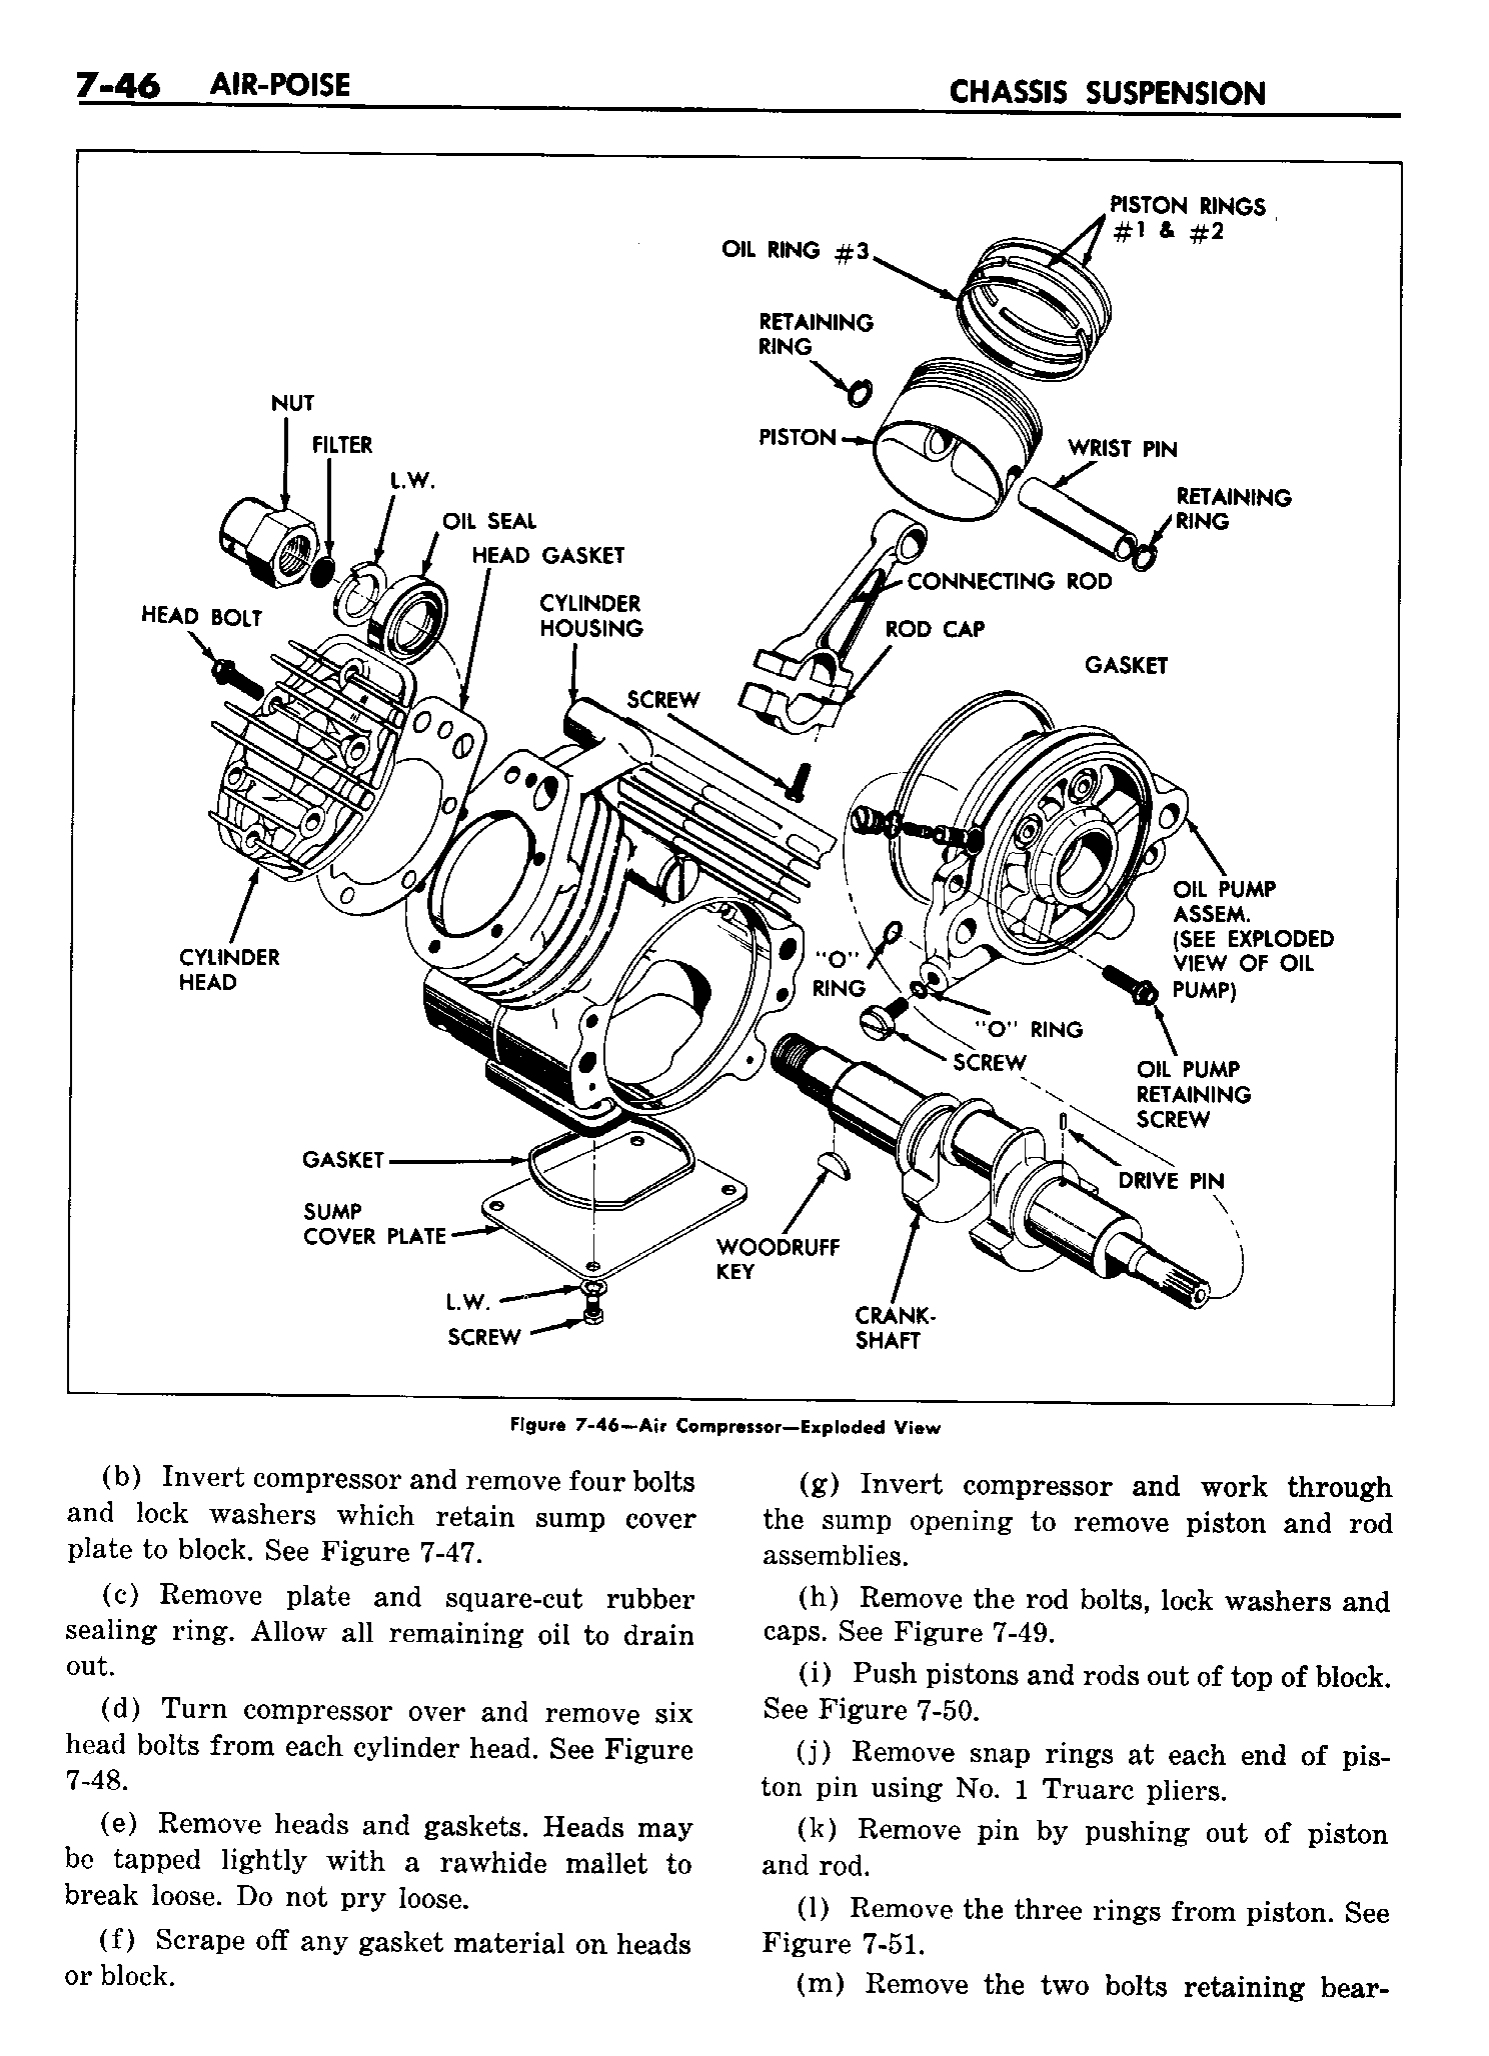 n_08 1958 Buick Shop Manual - Chassis Suspension_46.jpg